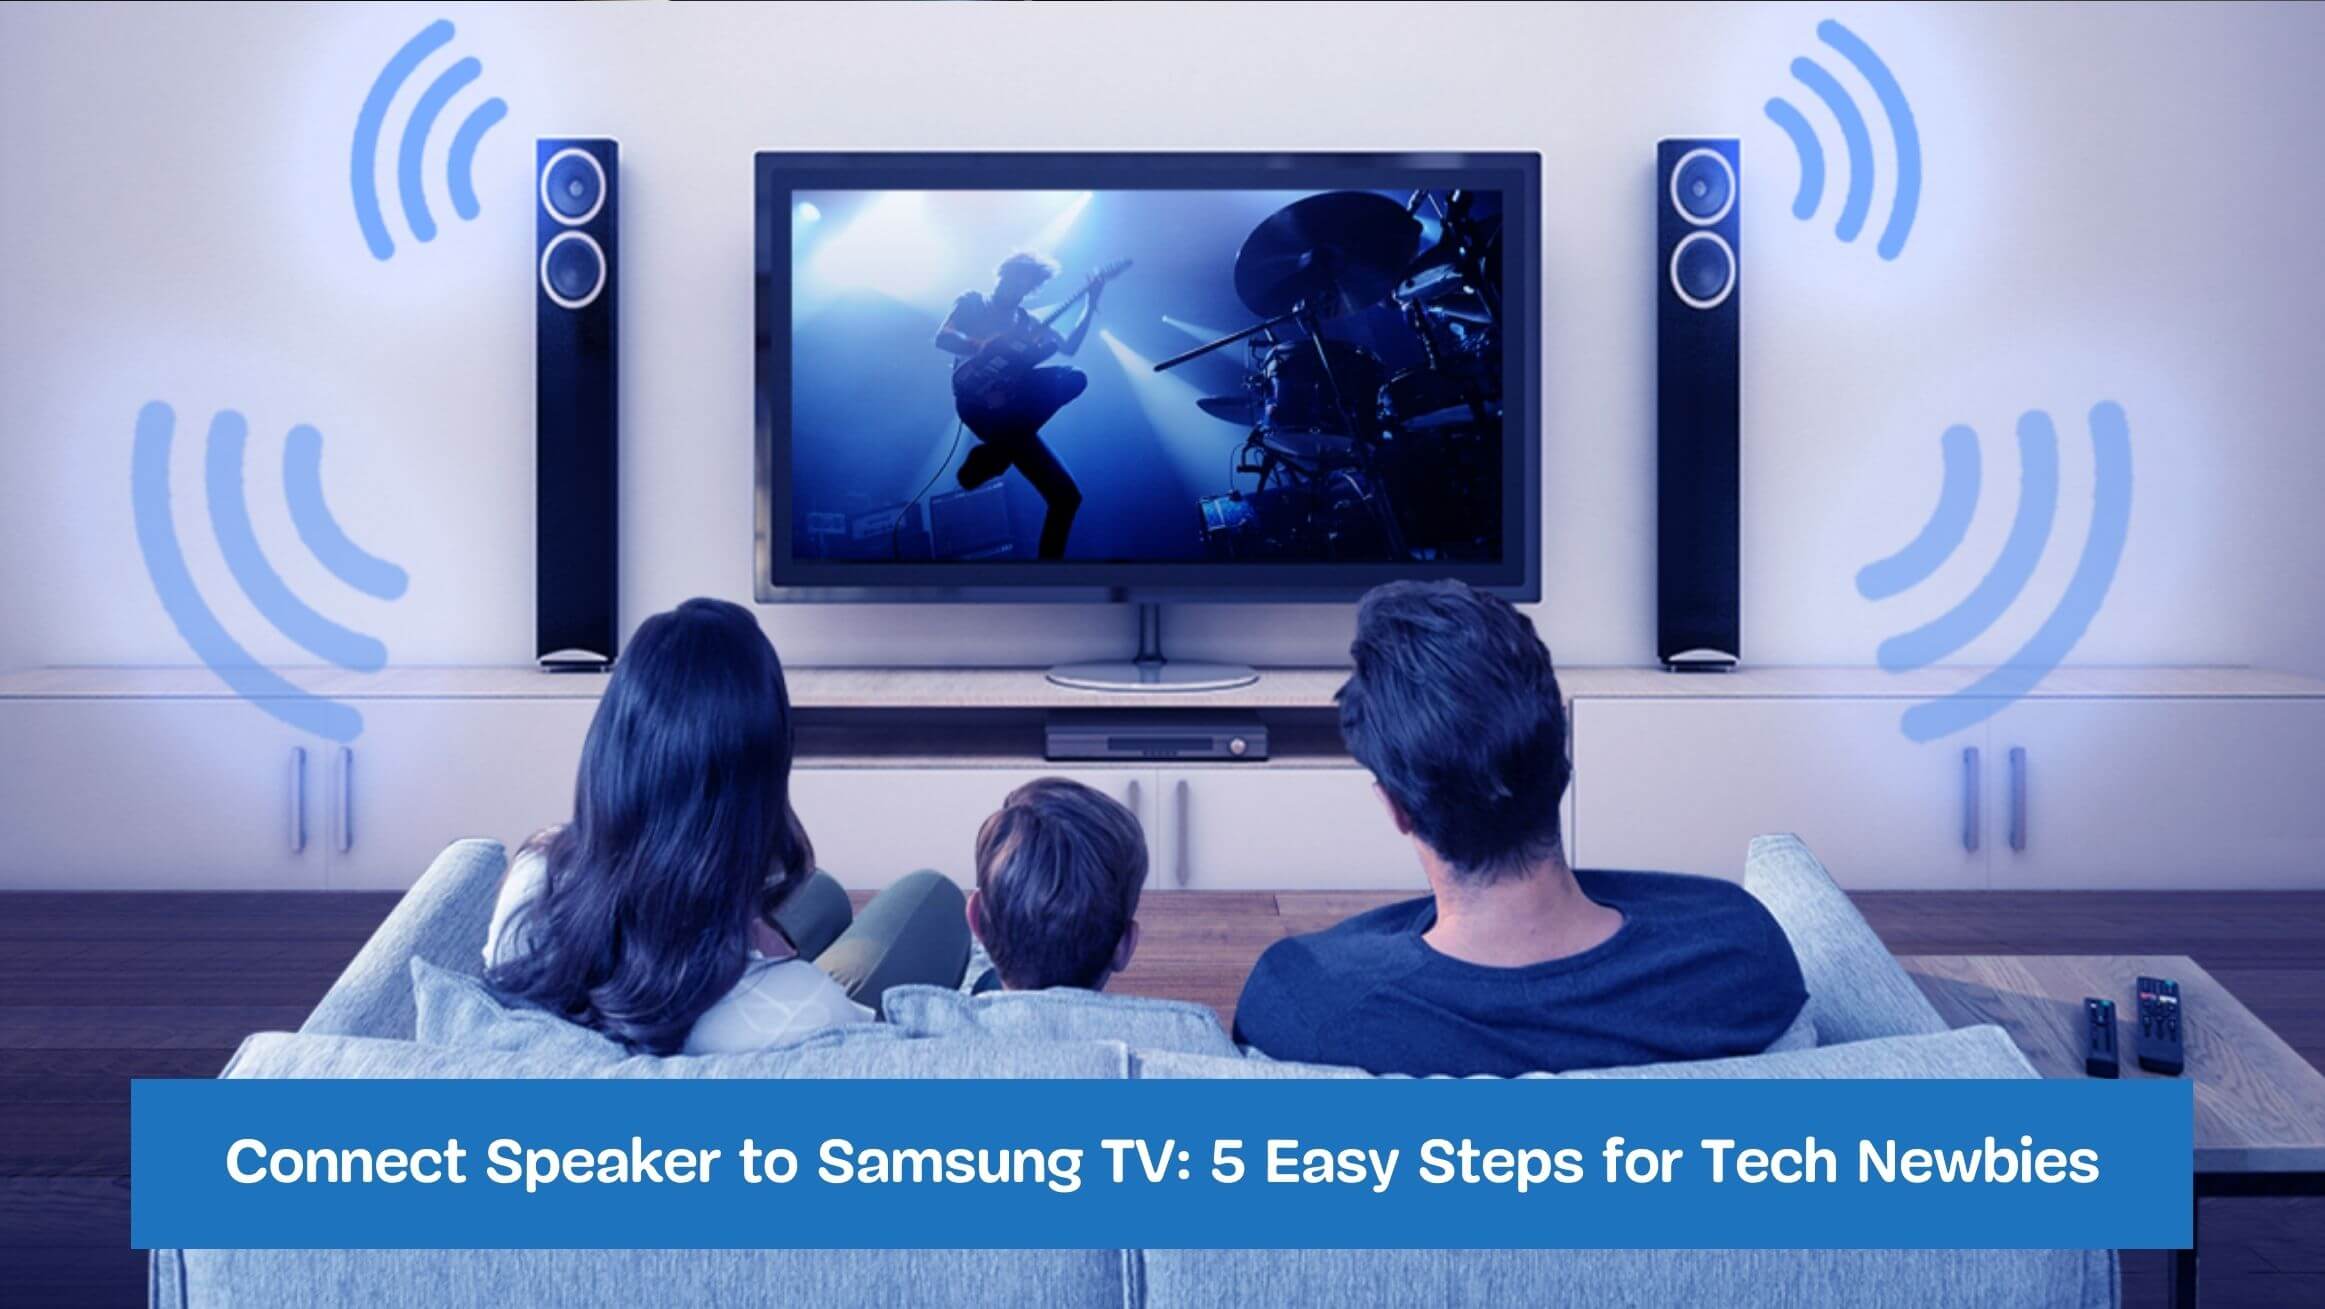 Connect Speaker to Samsung TV: 5 Easy Steps for Tech Newbies